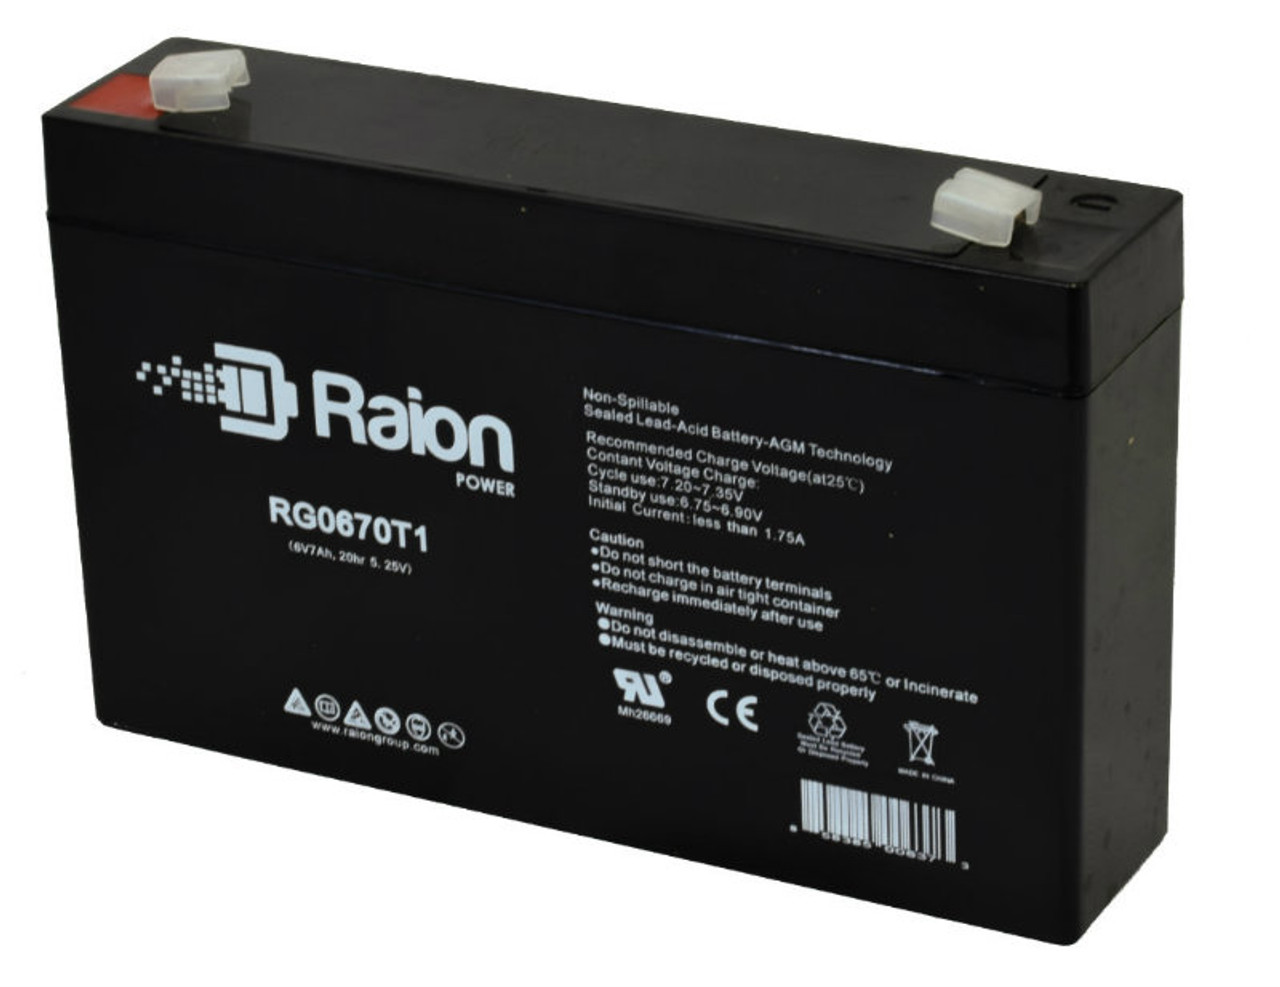 Raion Power RG0670T1 6V 7Ah Replacement Emergency Lighting Battery for Sure-Lites 2645